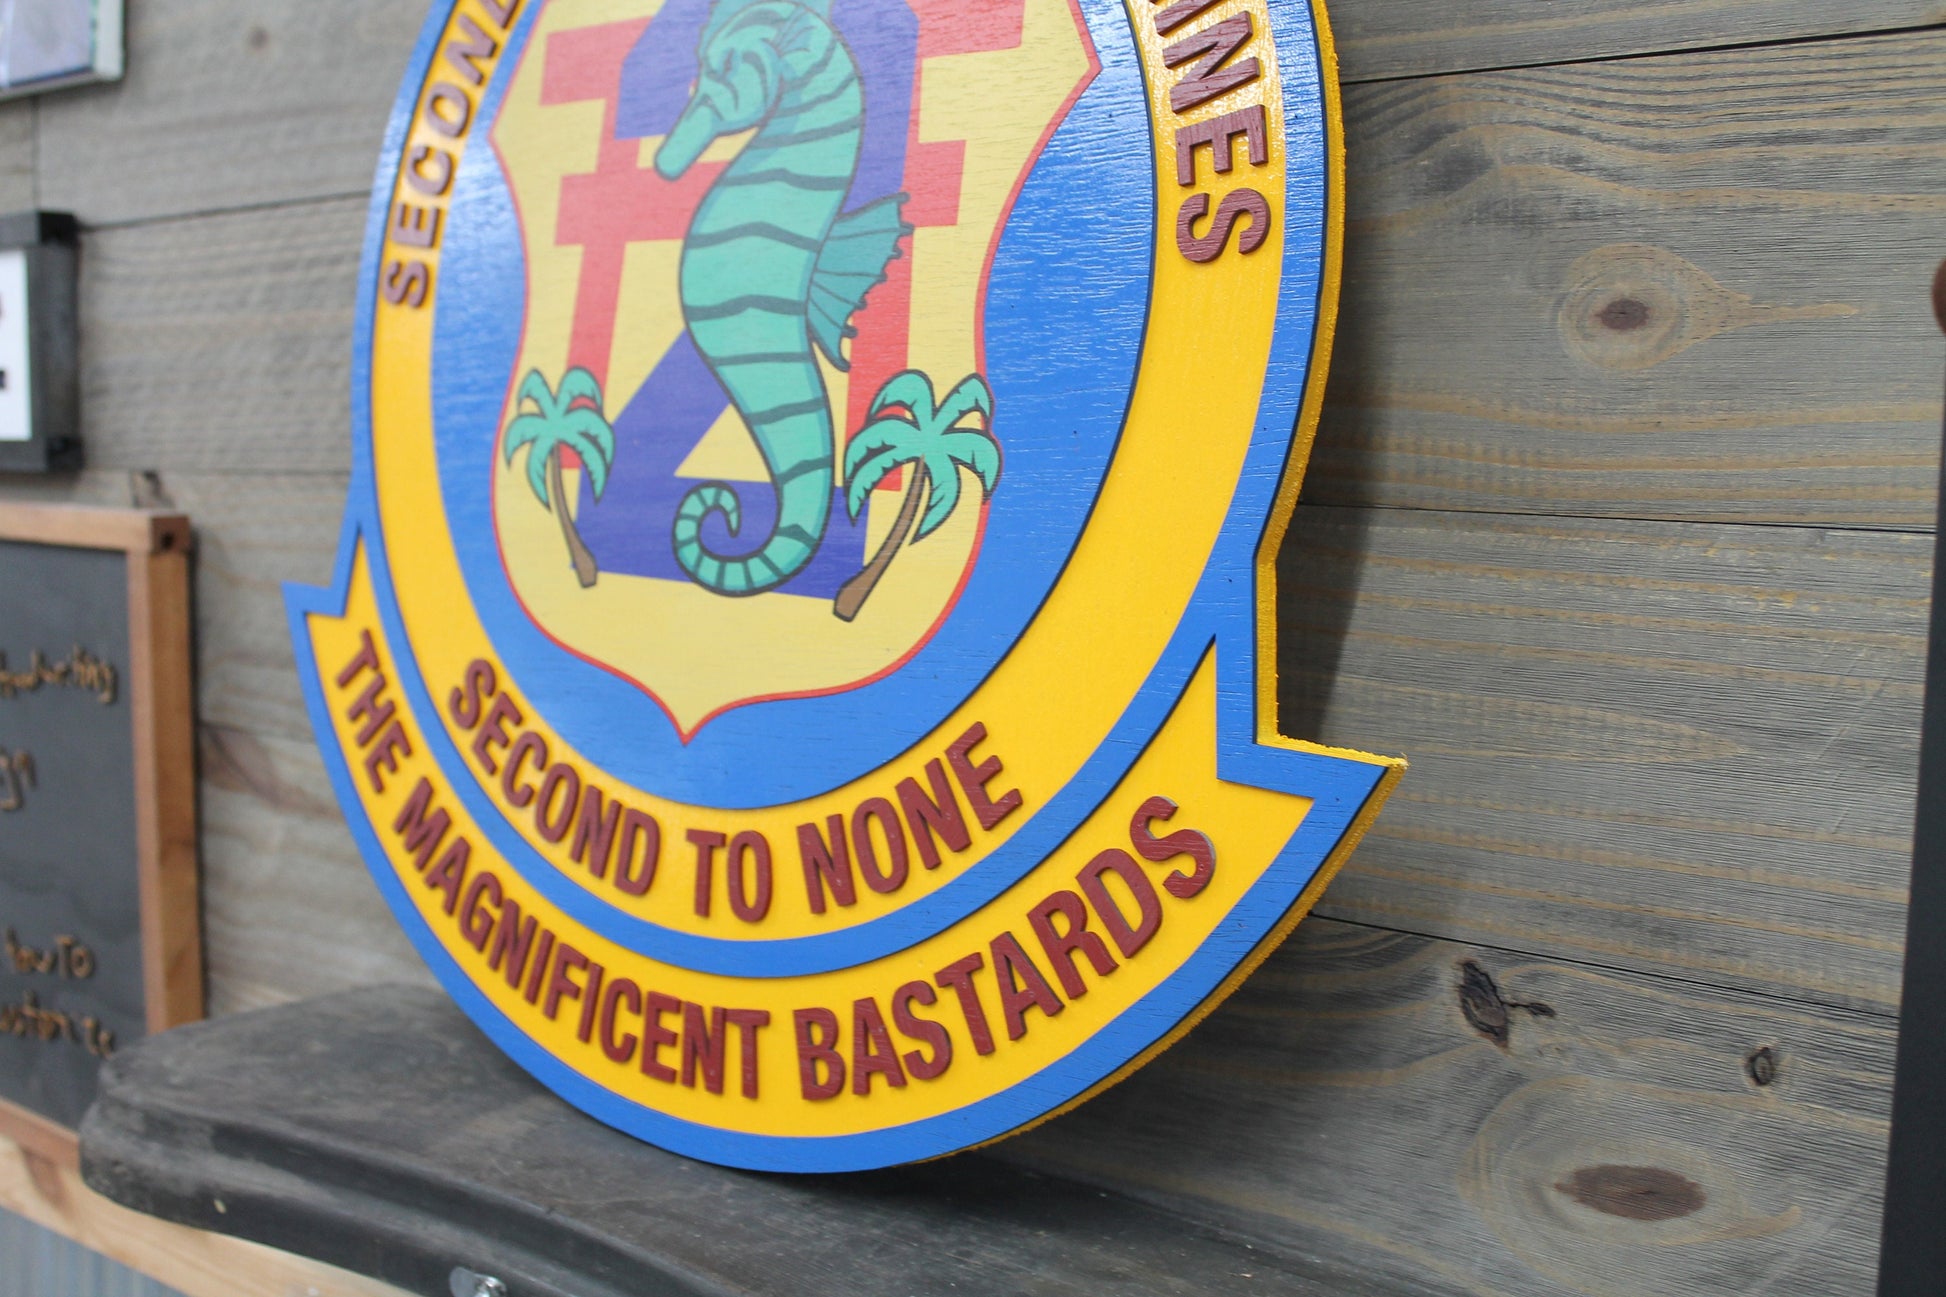 Battalion Seahorse Palm Marines Military Sheild Badge of Honor Personalize Sign Contoured Award Company 3D Made to Order Wooden Handmade